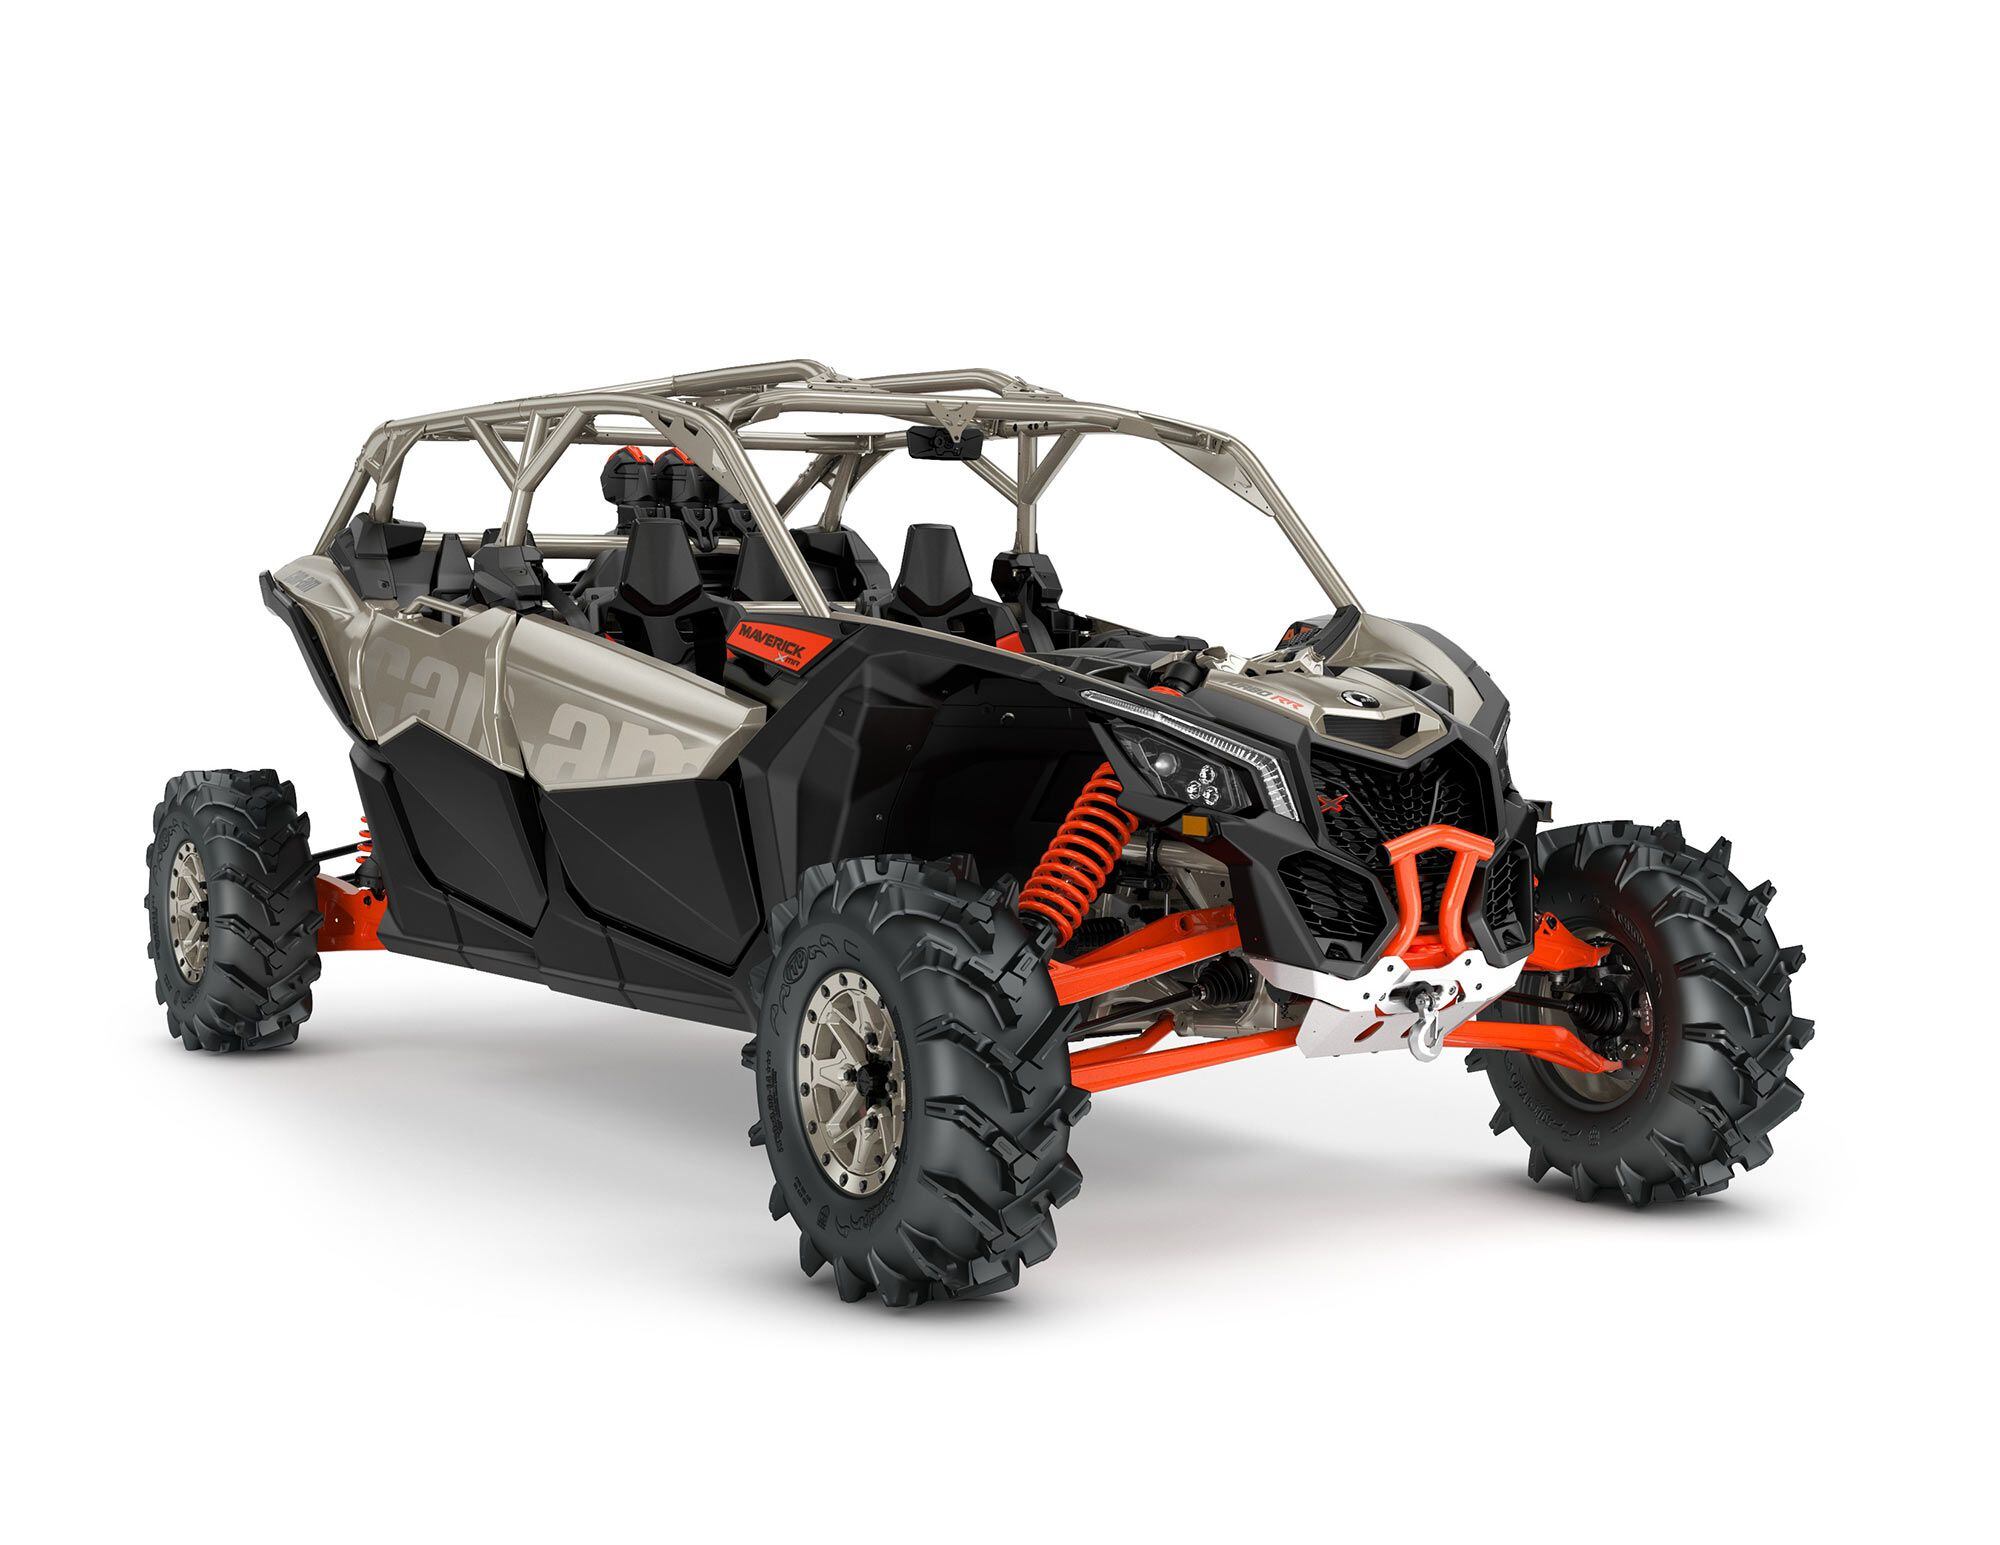 2022 Can-Am Maverick X3 Max X MR Turbo RR front view in Liquid Titanium and Magma Red.